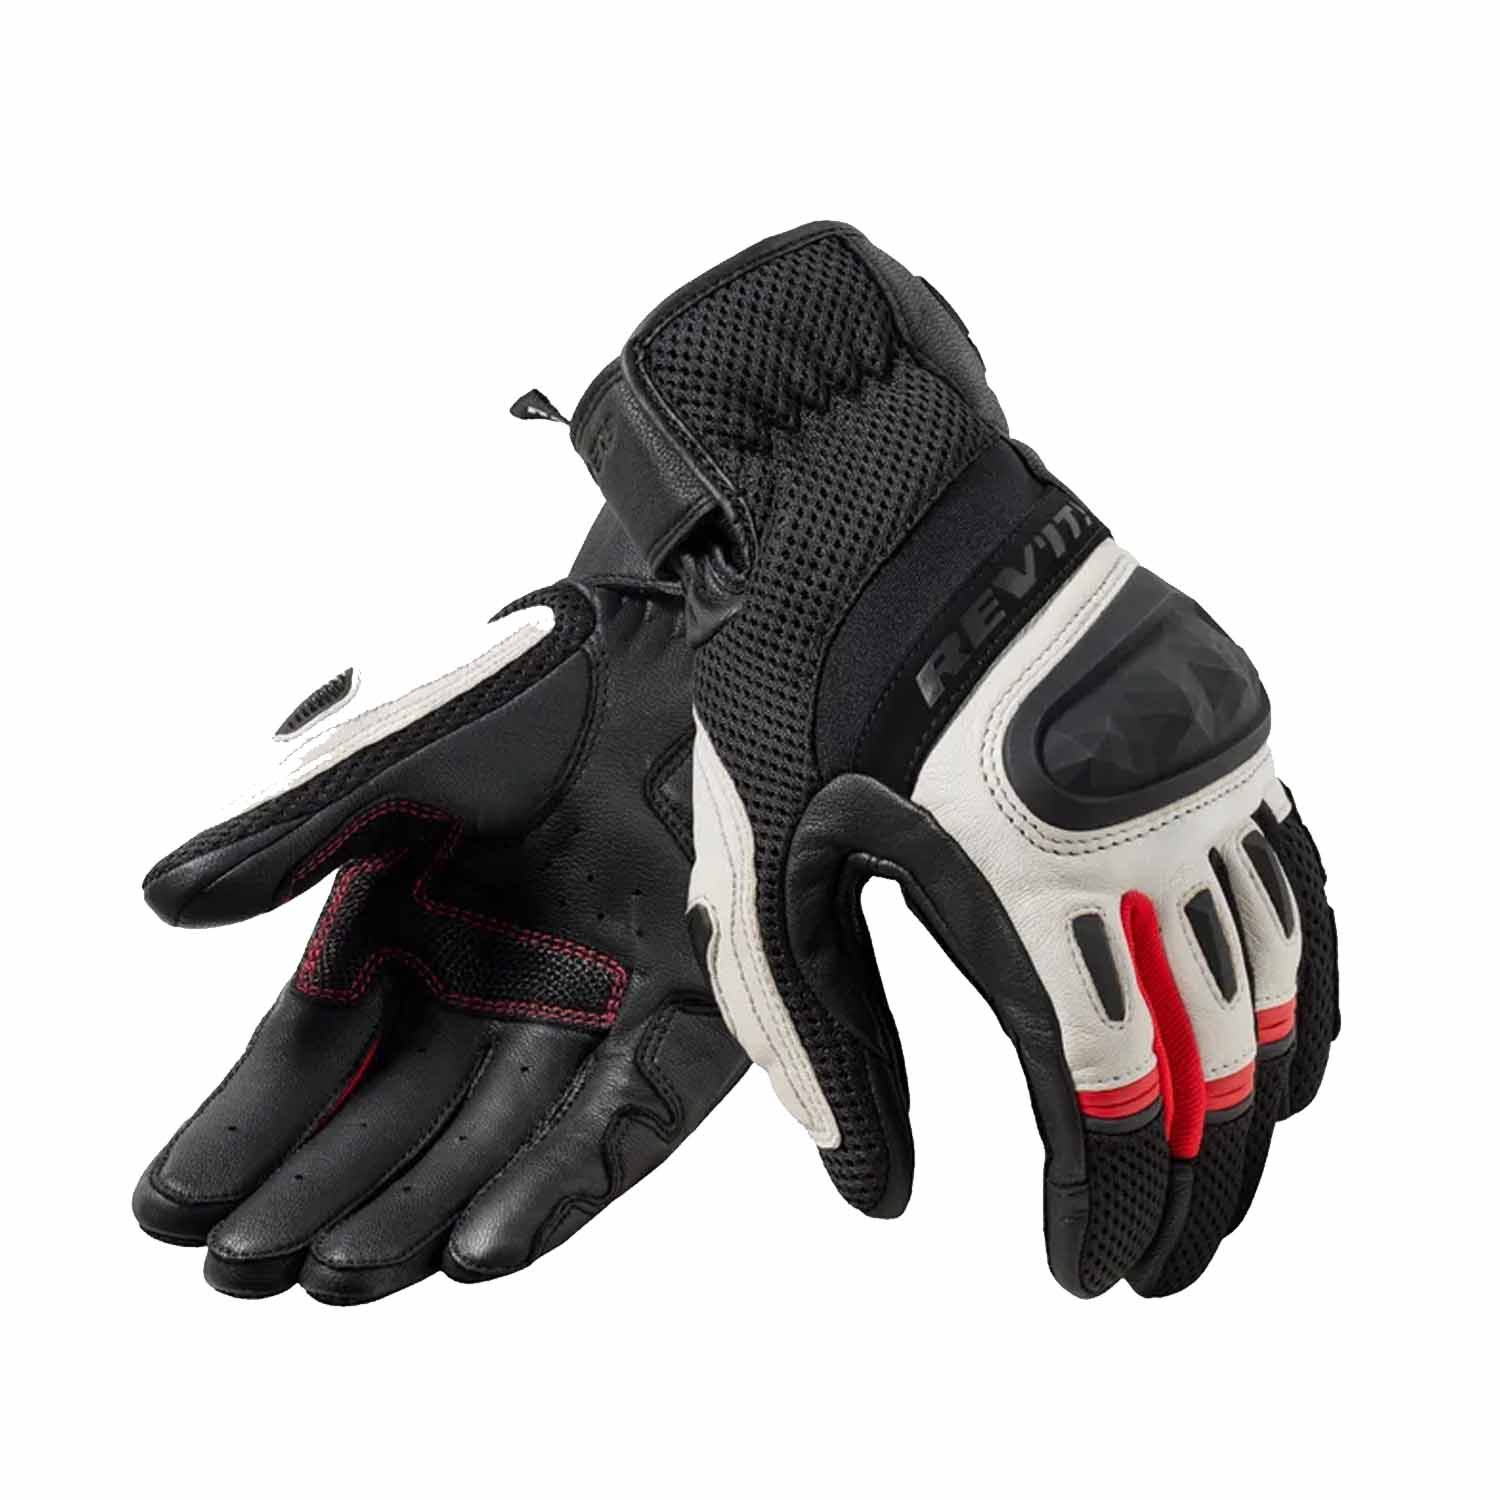 Image of REV'IT! Dirt 4 Gloves Black Red Size 2XL ID 8700001383493